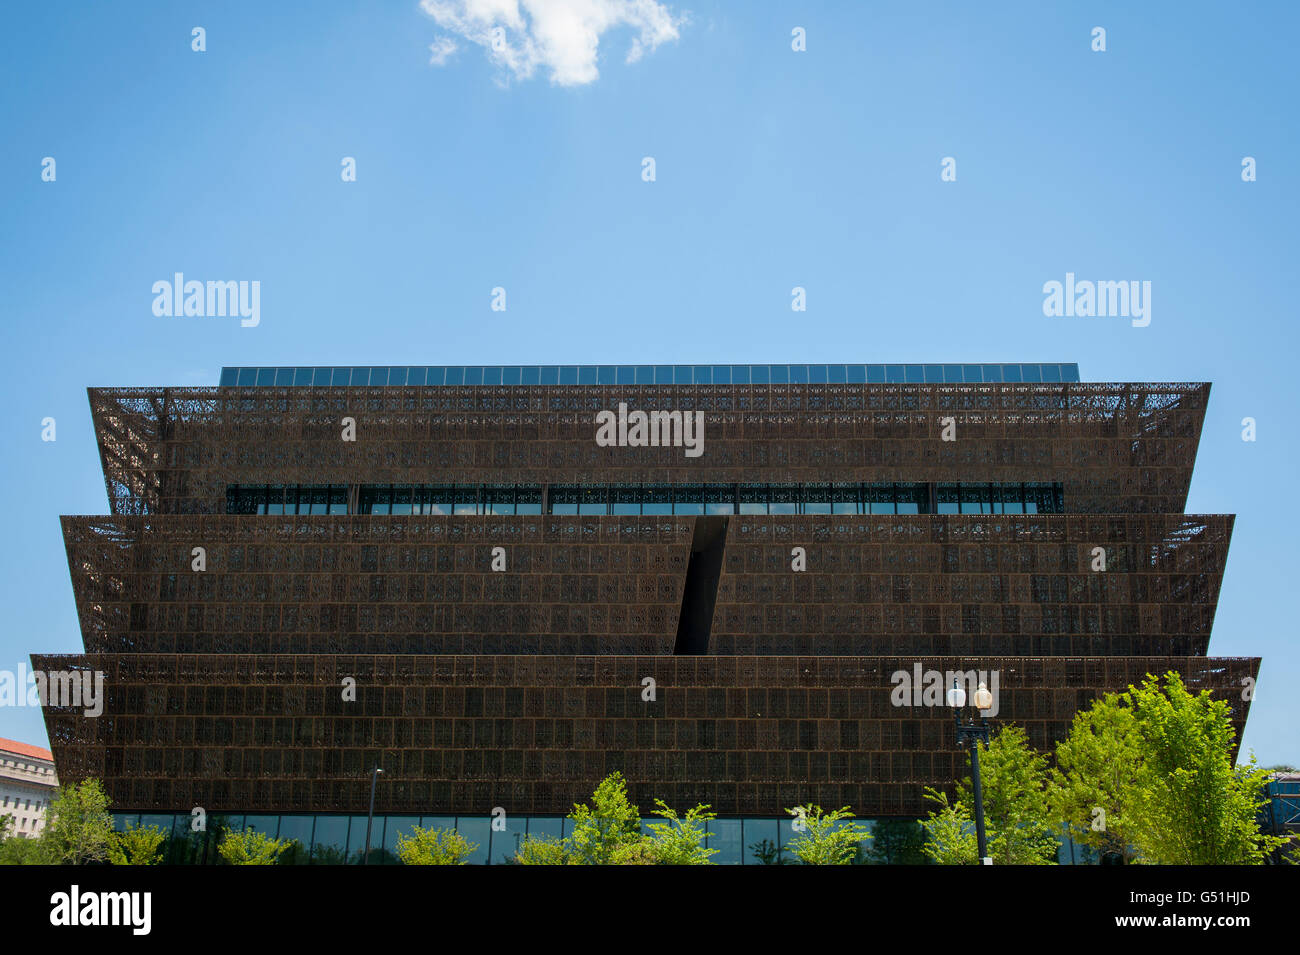 USA Washington DC The National Museum of African American History and Culture (NMAAHC) is a Smithsonian Institution museum Stock Photo